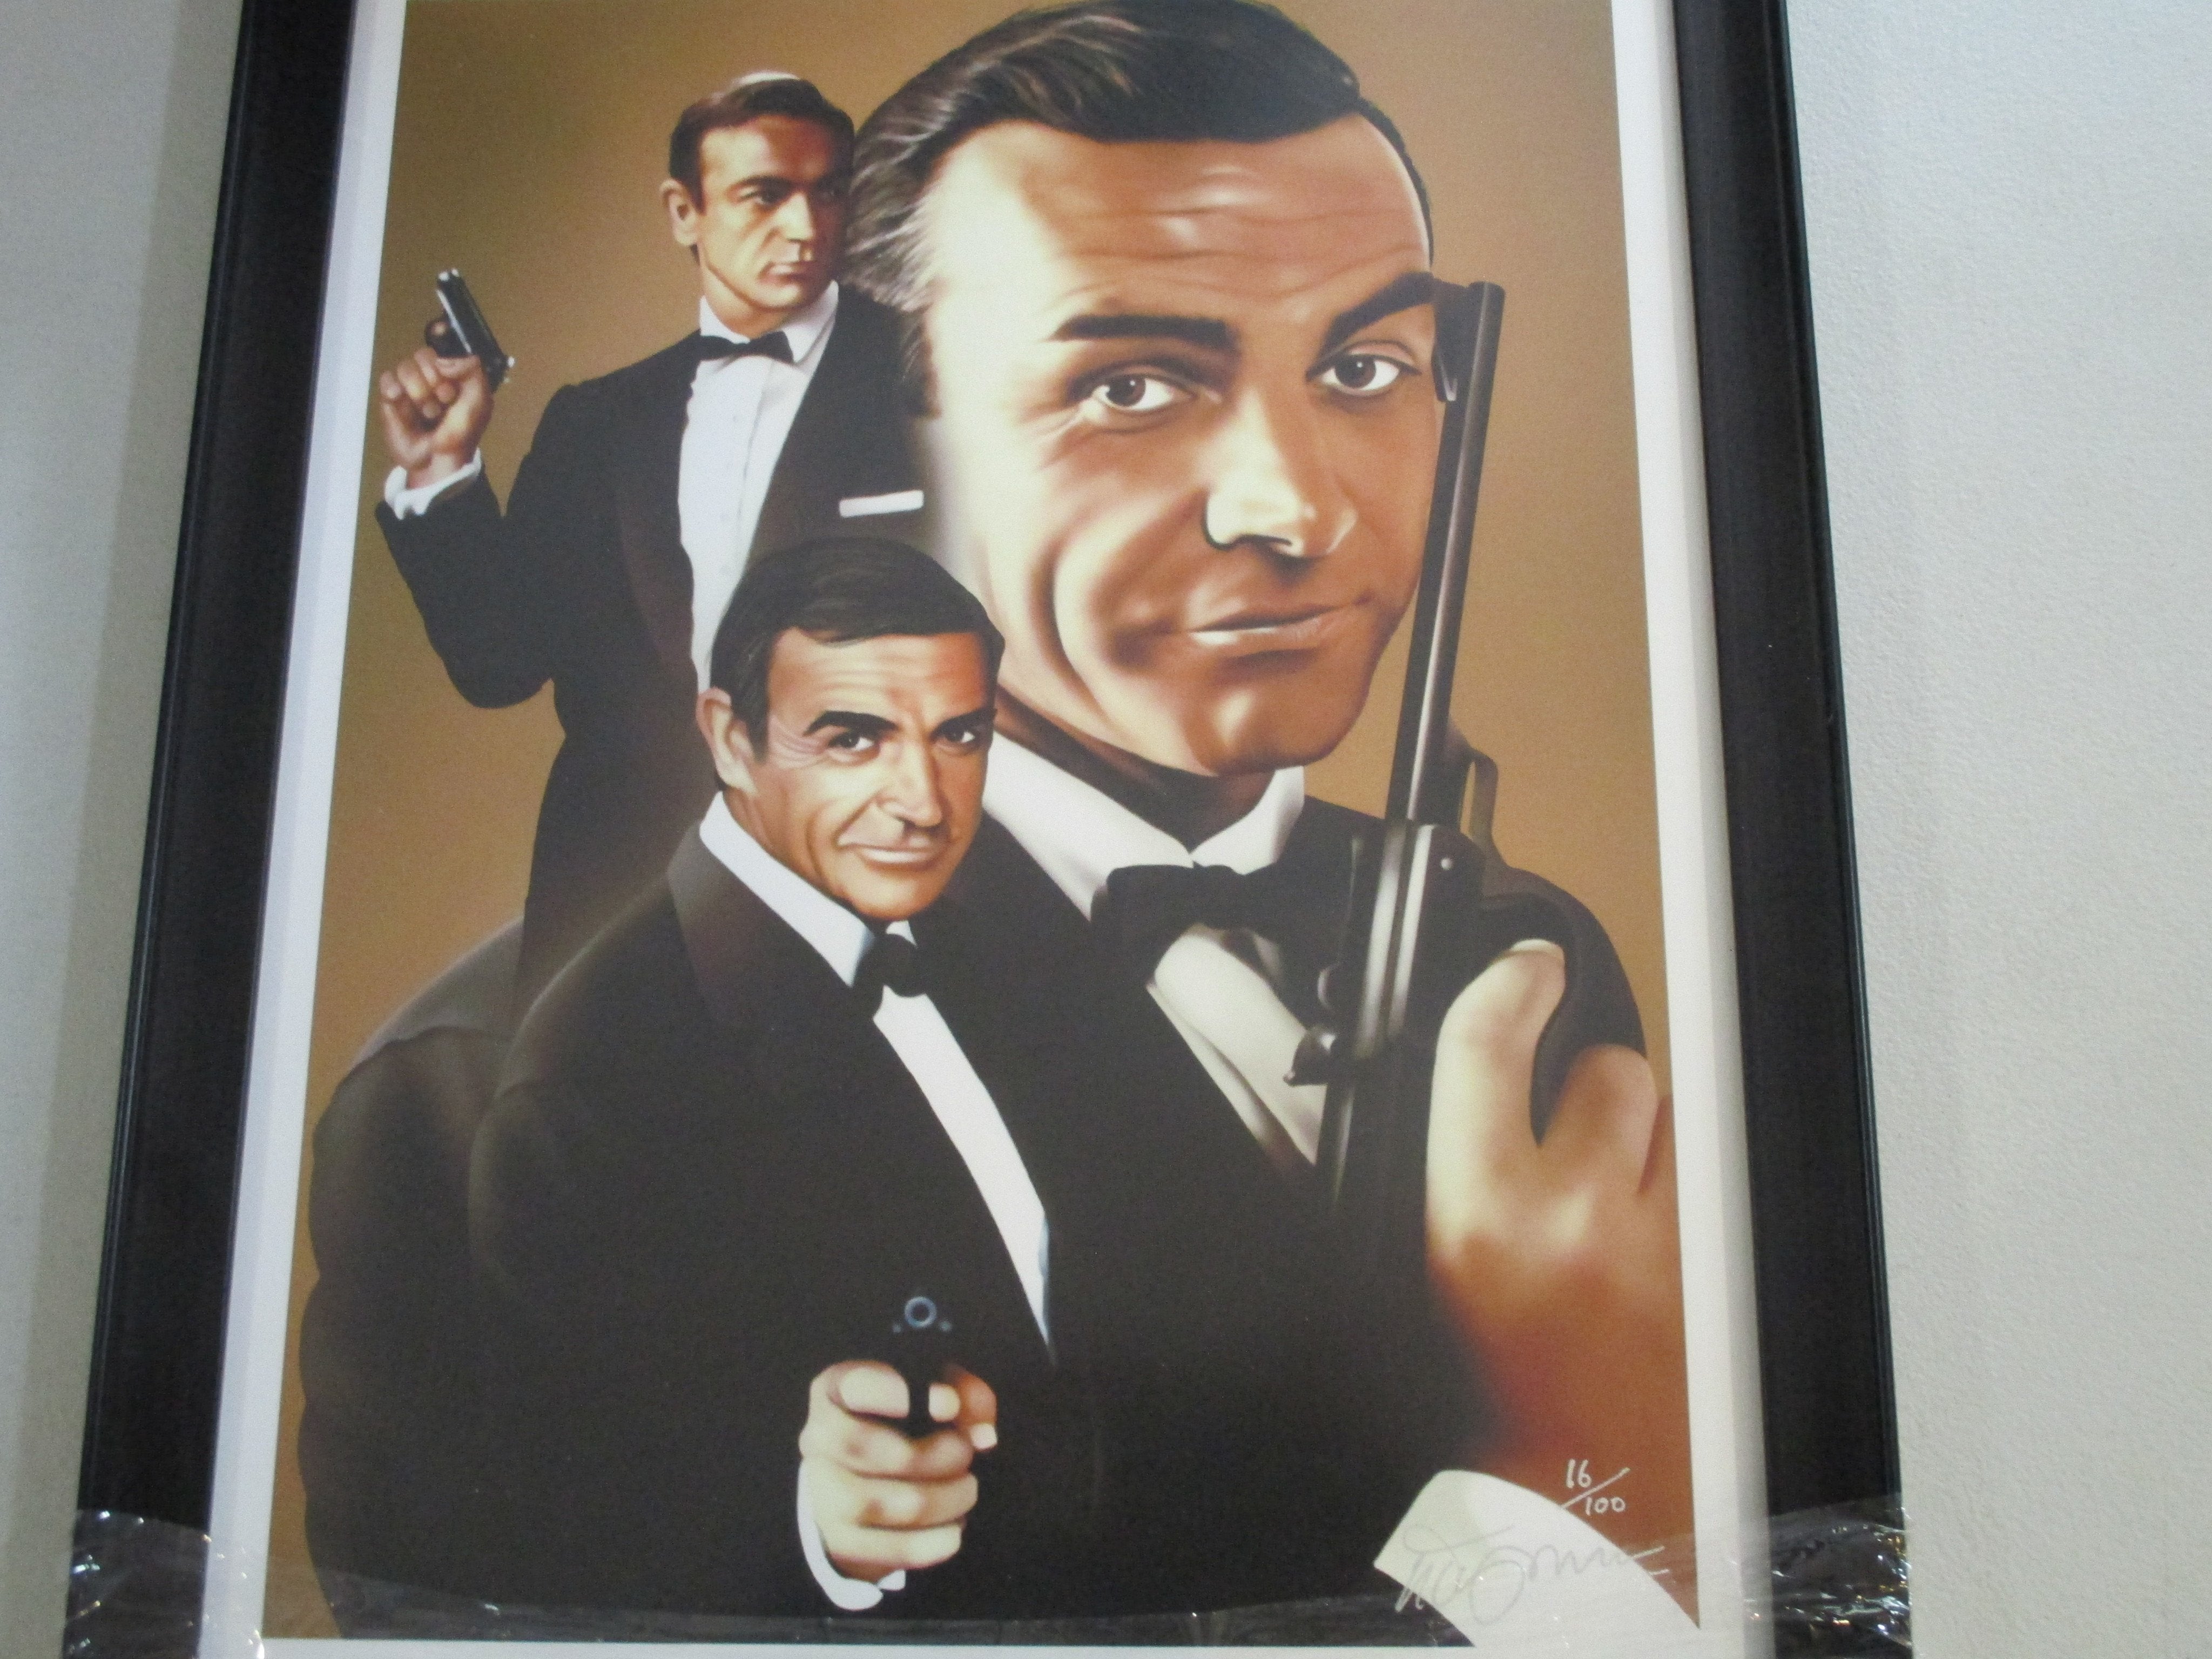 JAMES BOND-SEAN CONNERY LIMITED EDITION PRINT FRAMED - London Art and Souvenirs